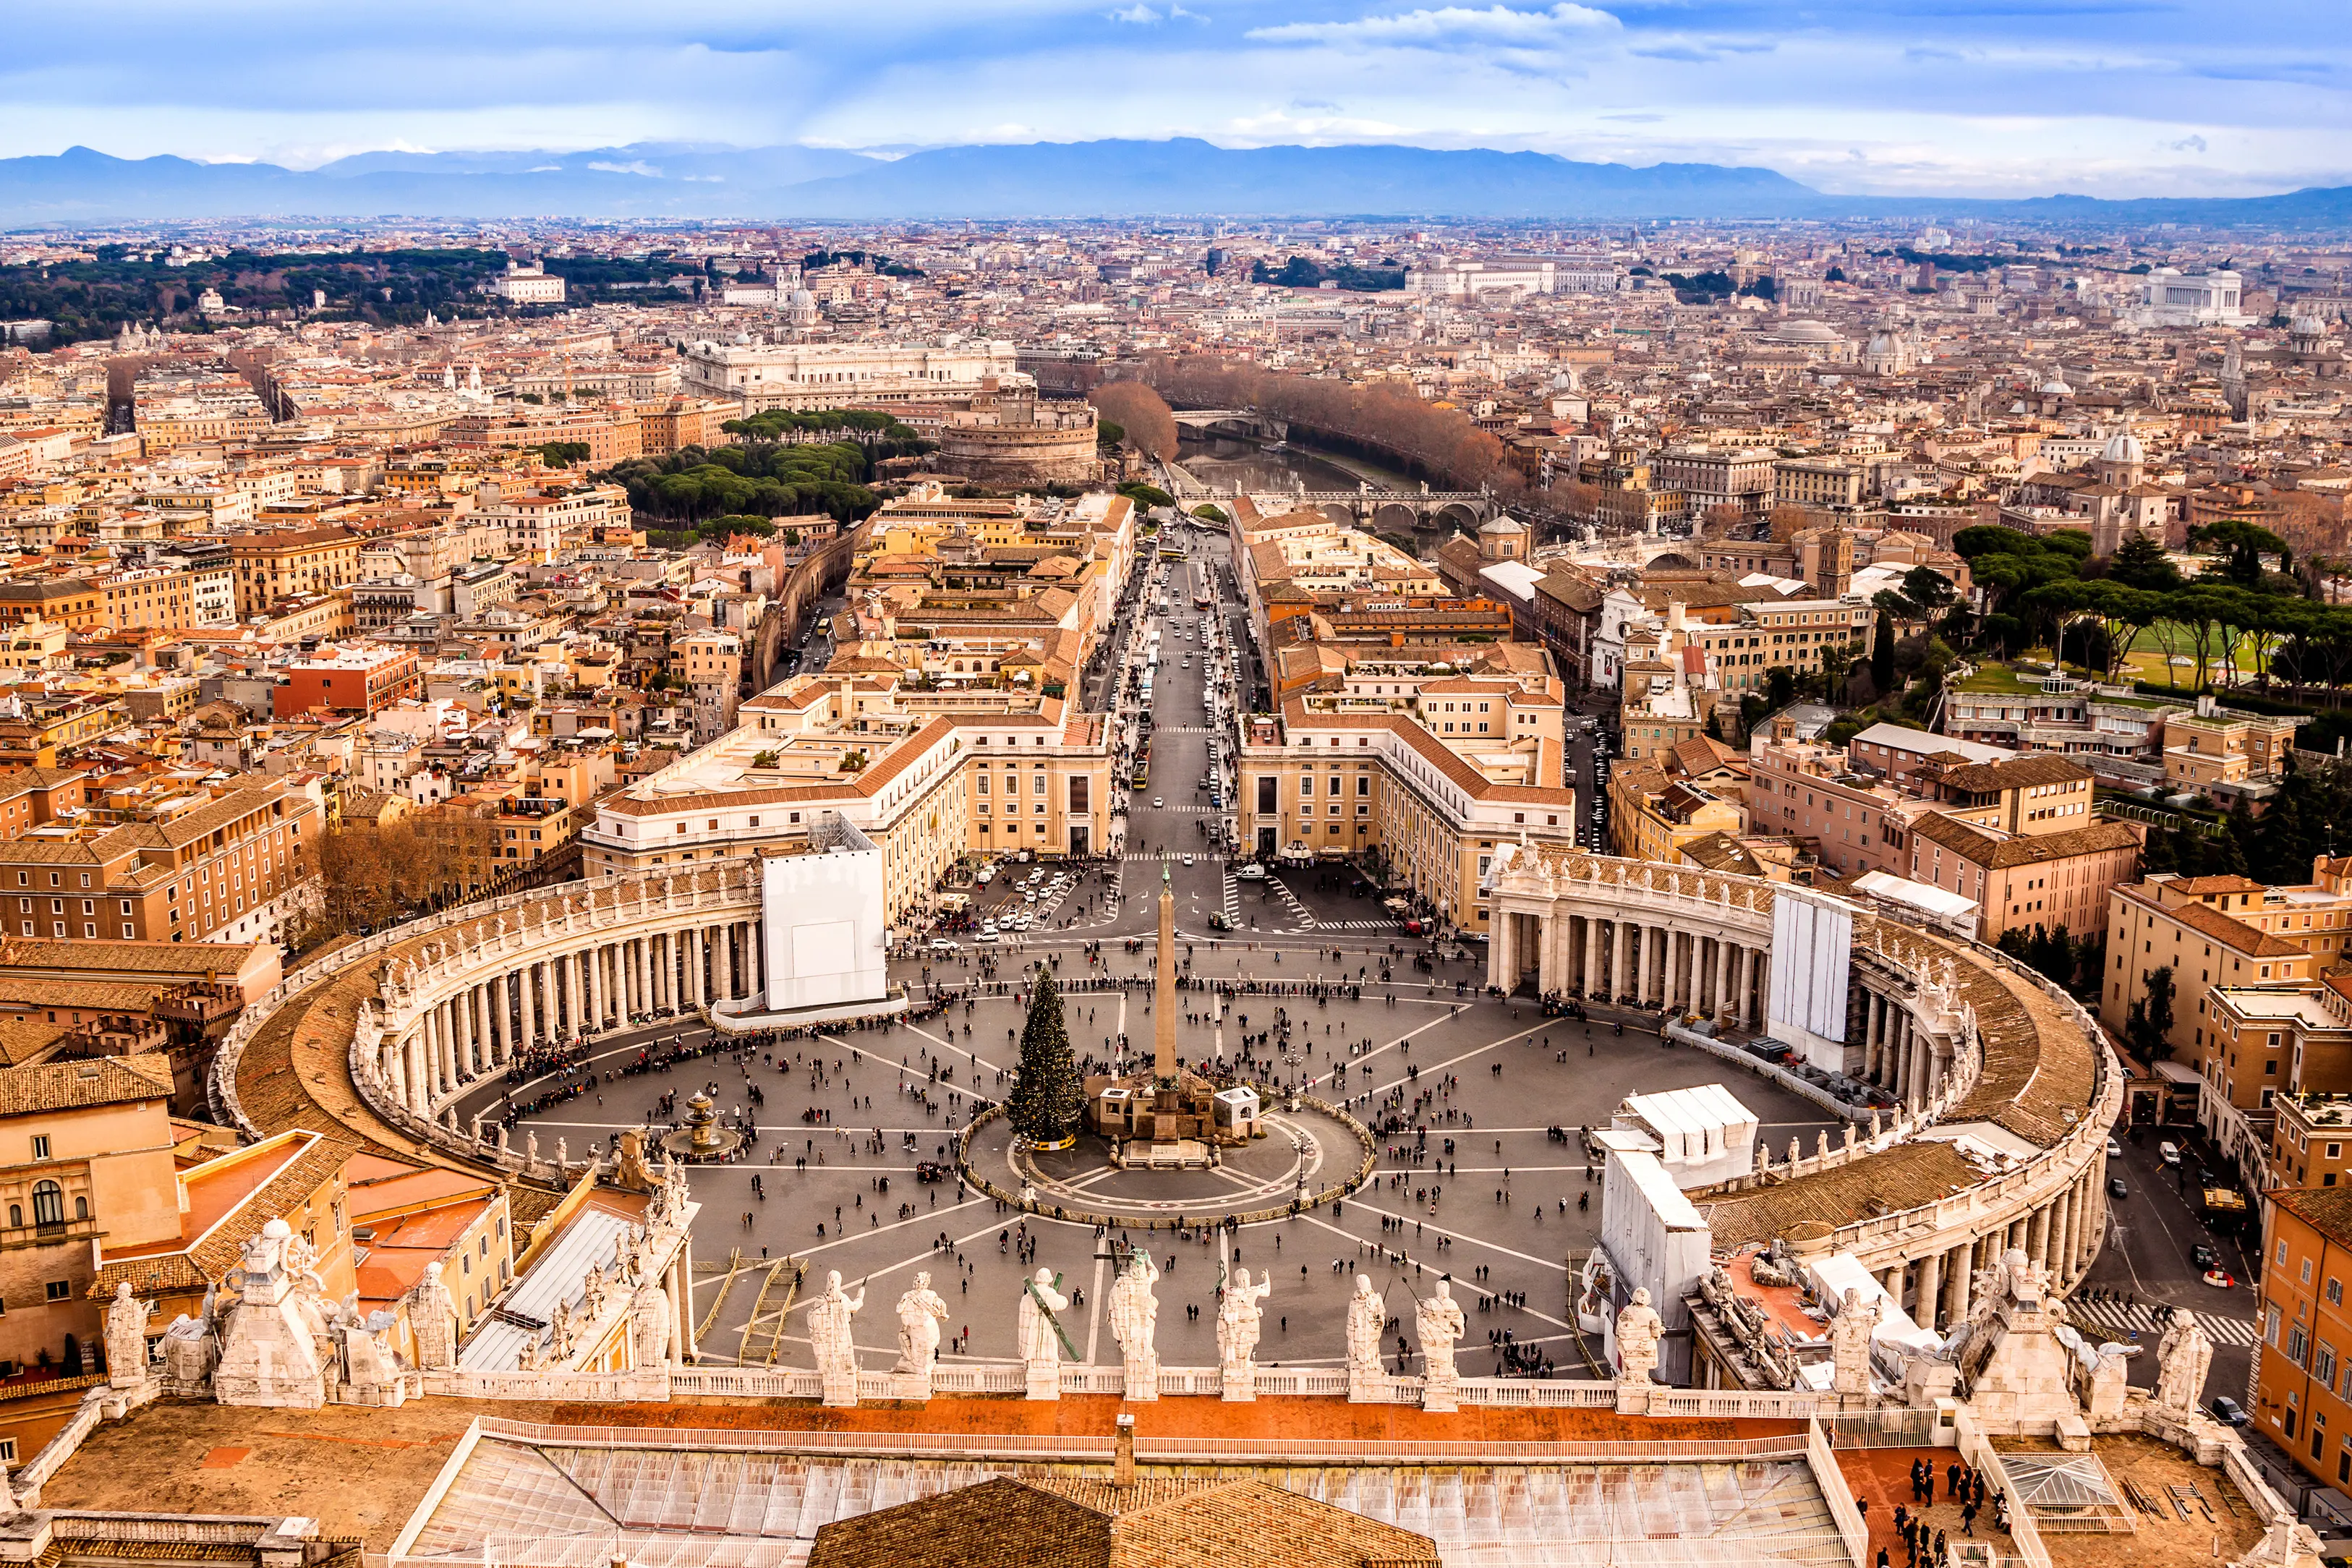 Visiting the Vatican: 7 Splendid Ways to Spend an Afternoon